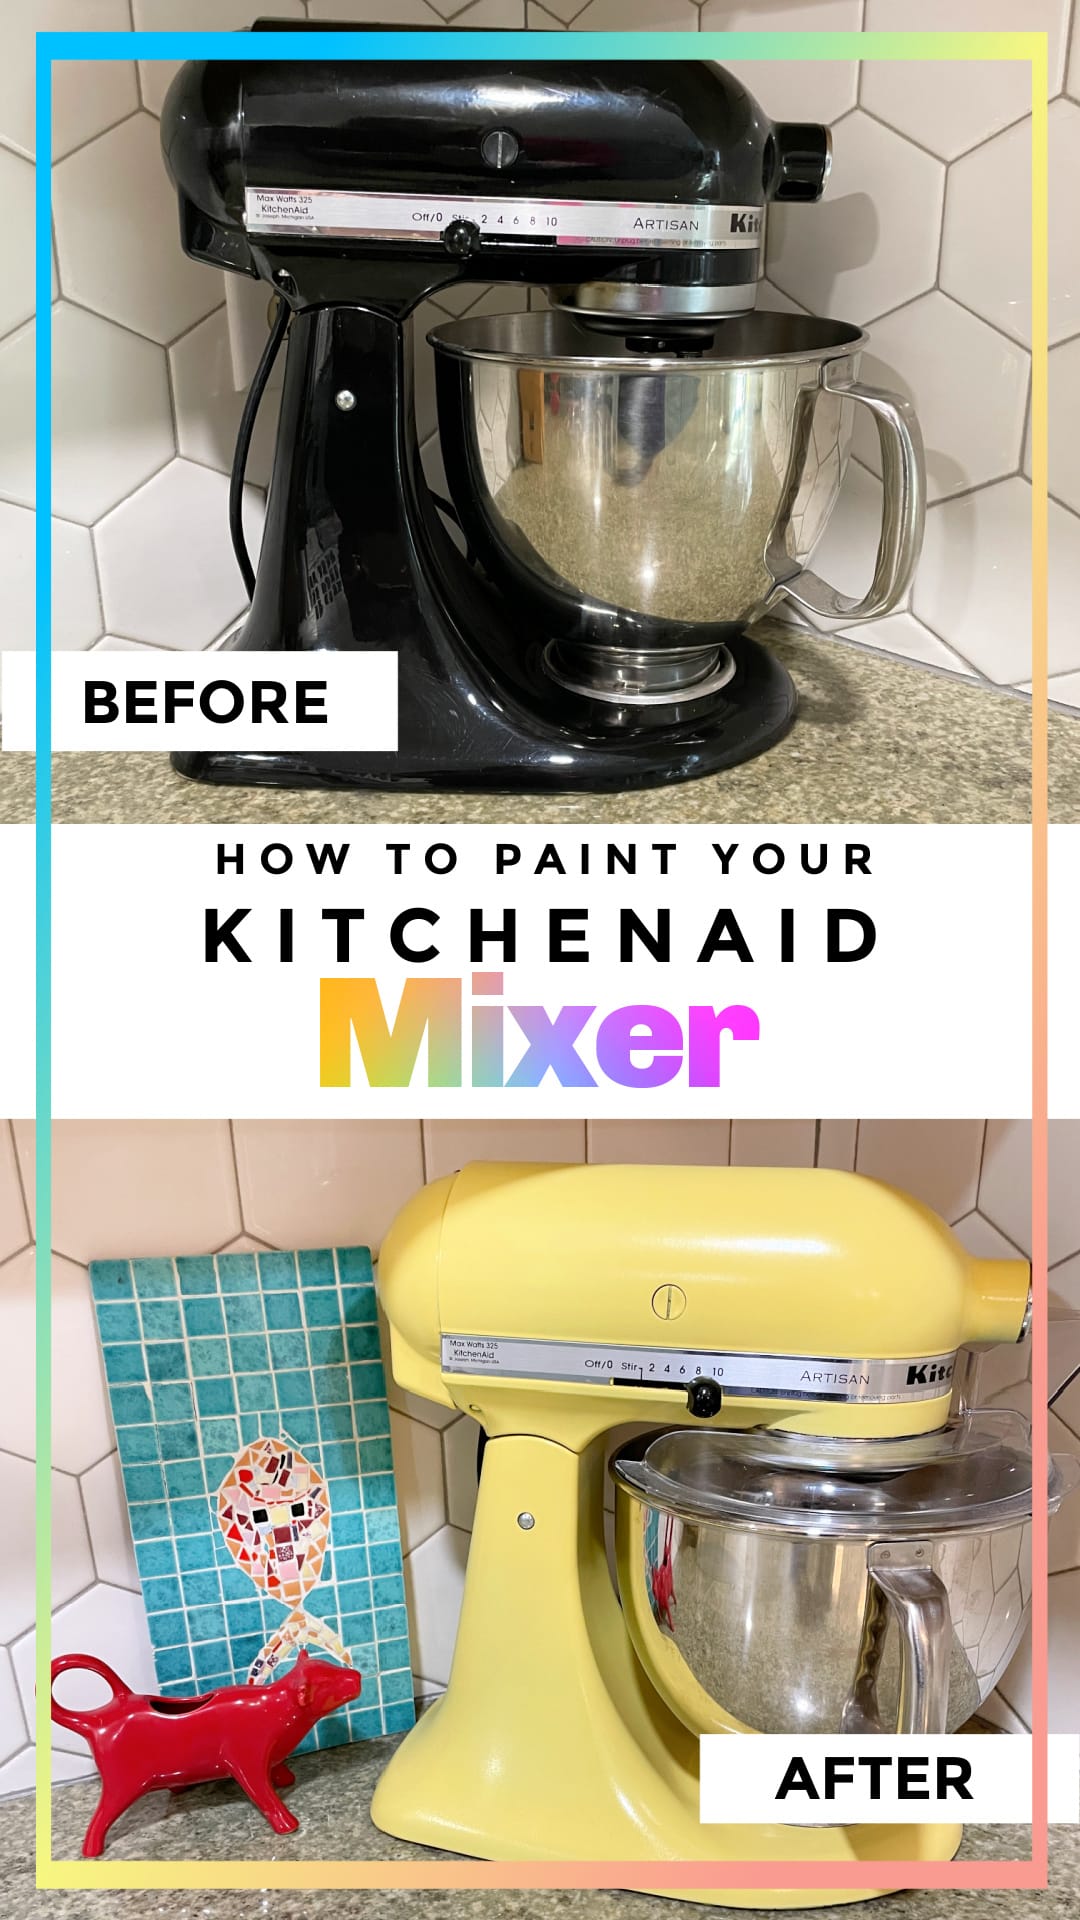 https://maggieoverbystudios.com/wp-content/uploads/2021/12/How-to-paint-your-kitchenaid-mixer-yellow.jpg